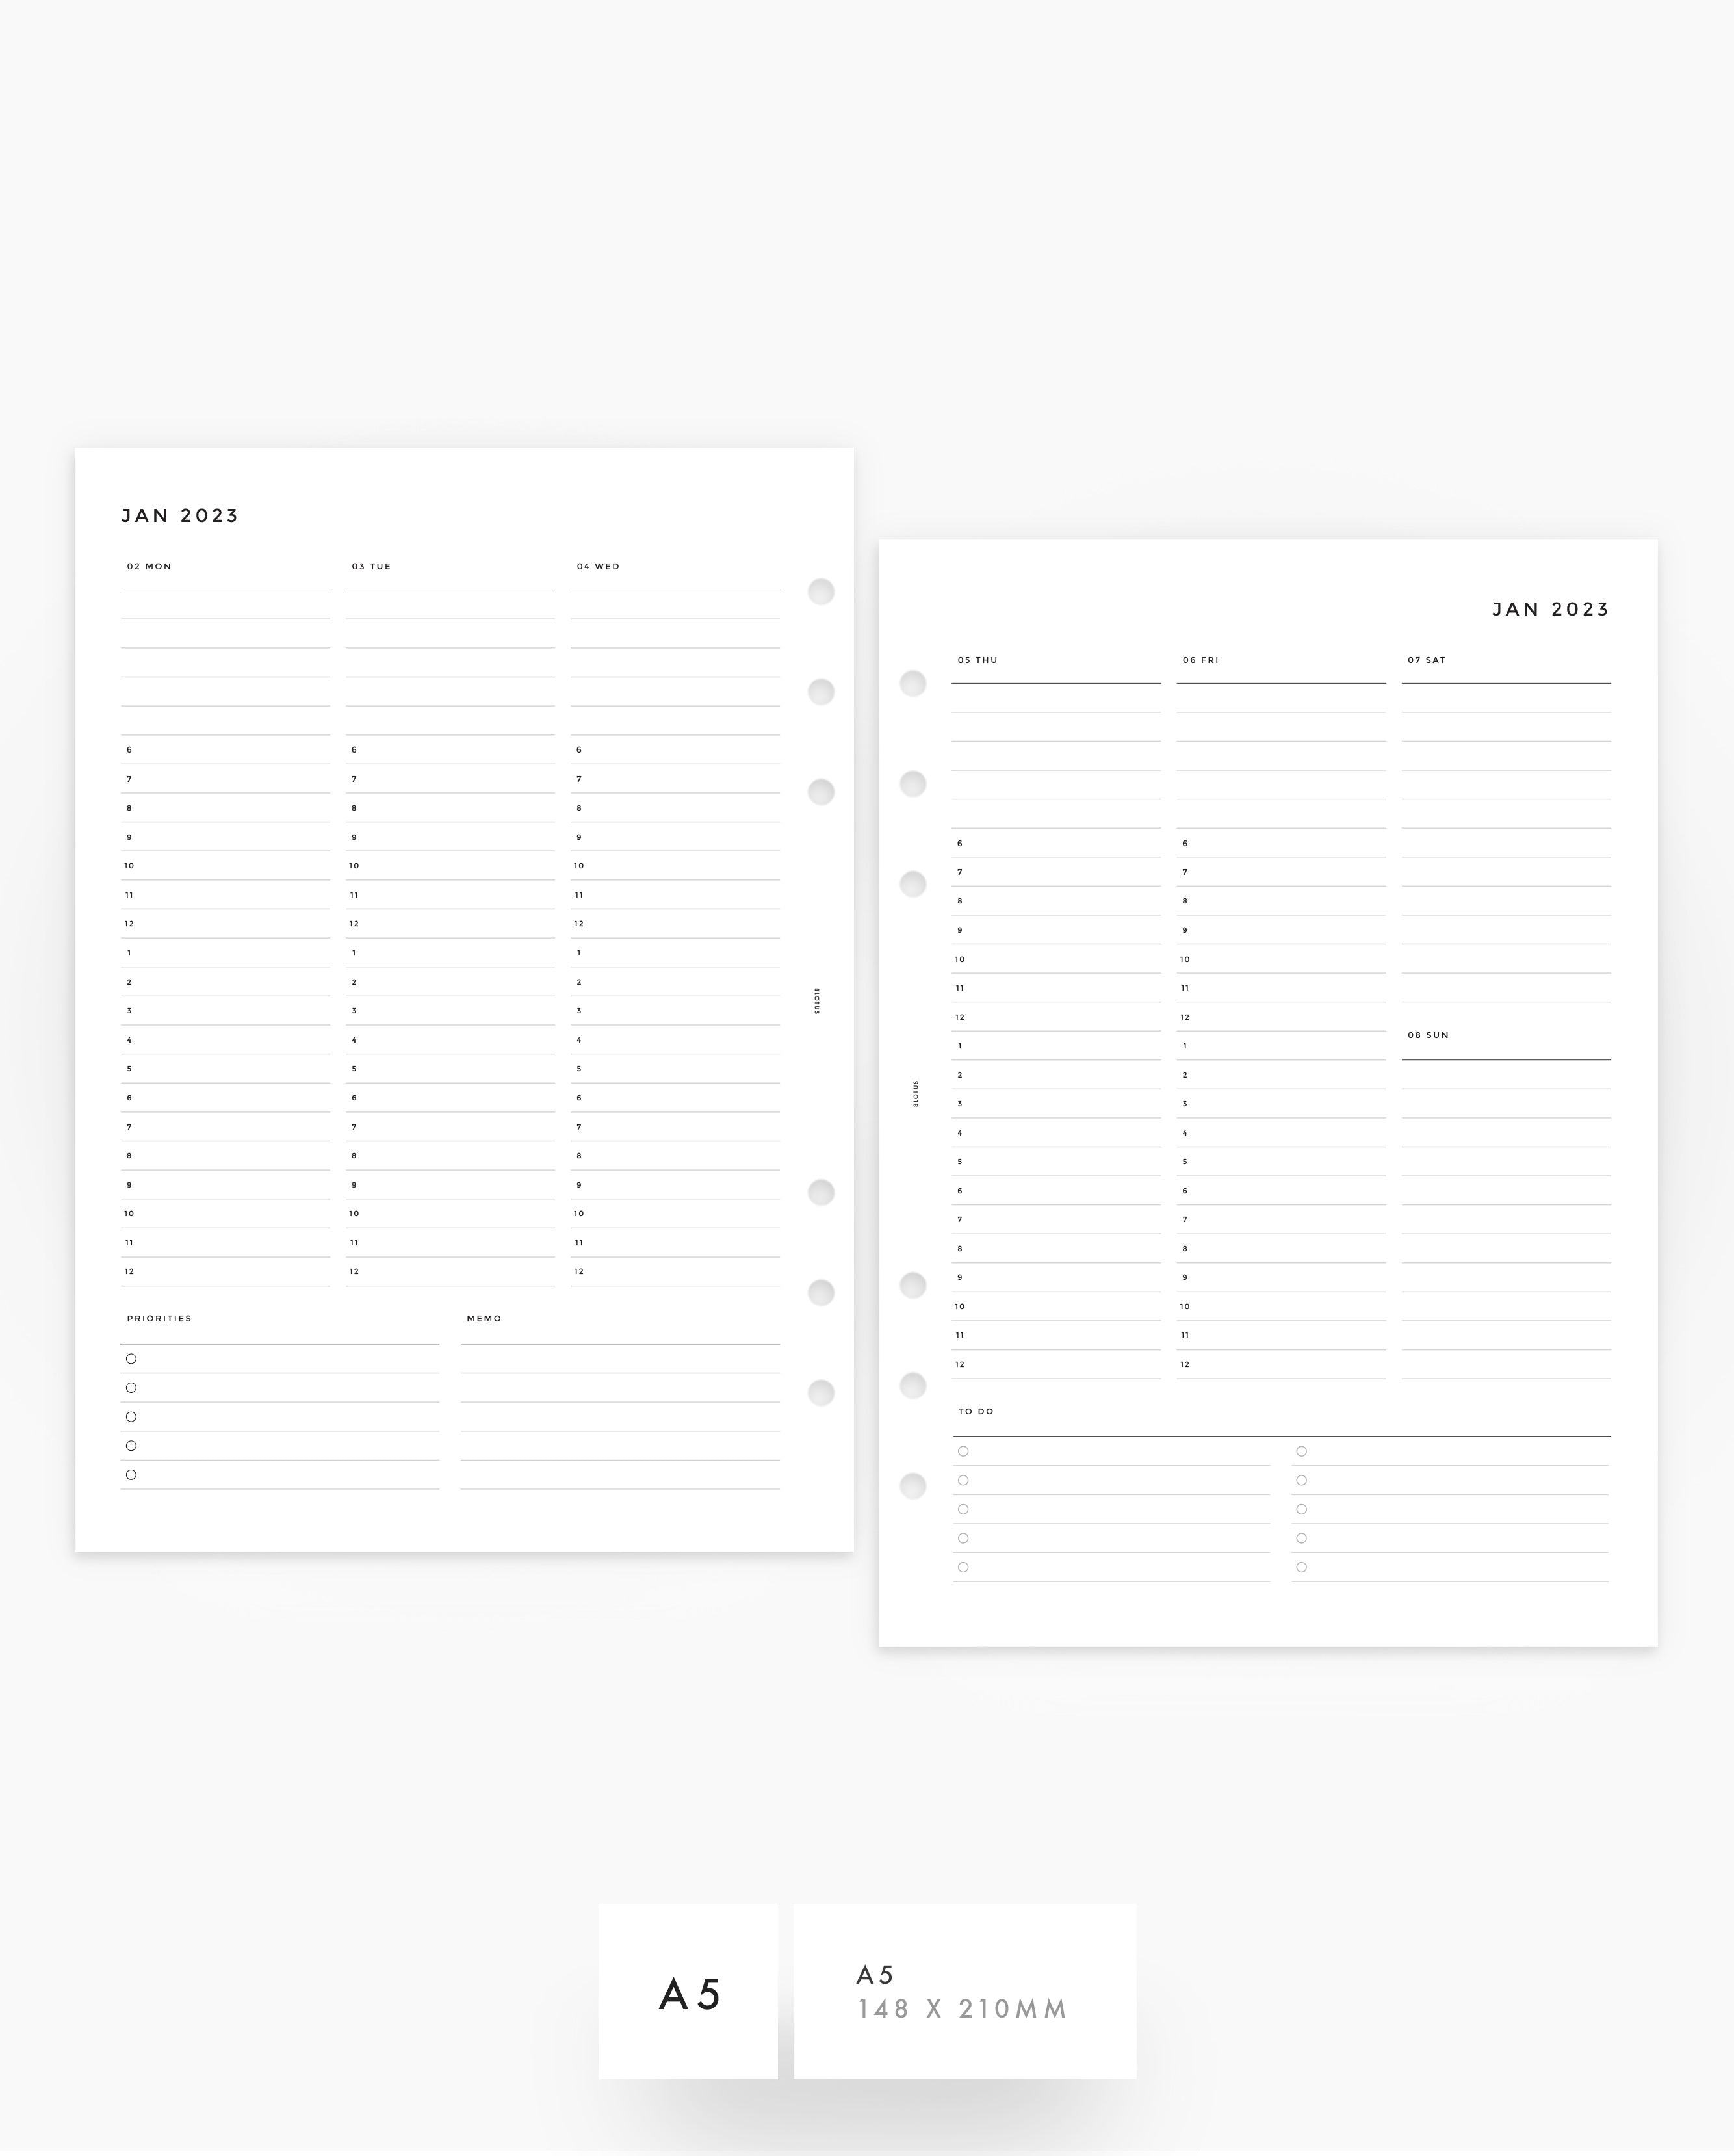 MN025 - 2023 Weekly Planner - HOURLY - WO2P